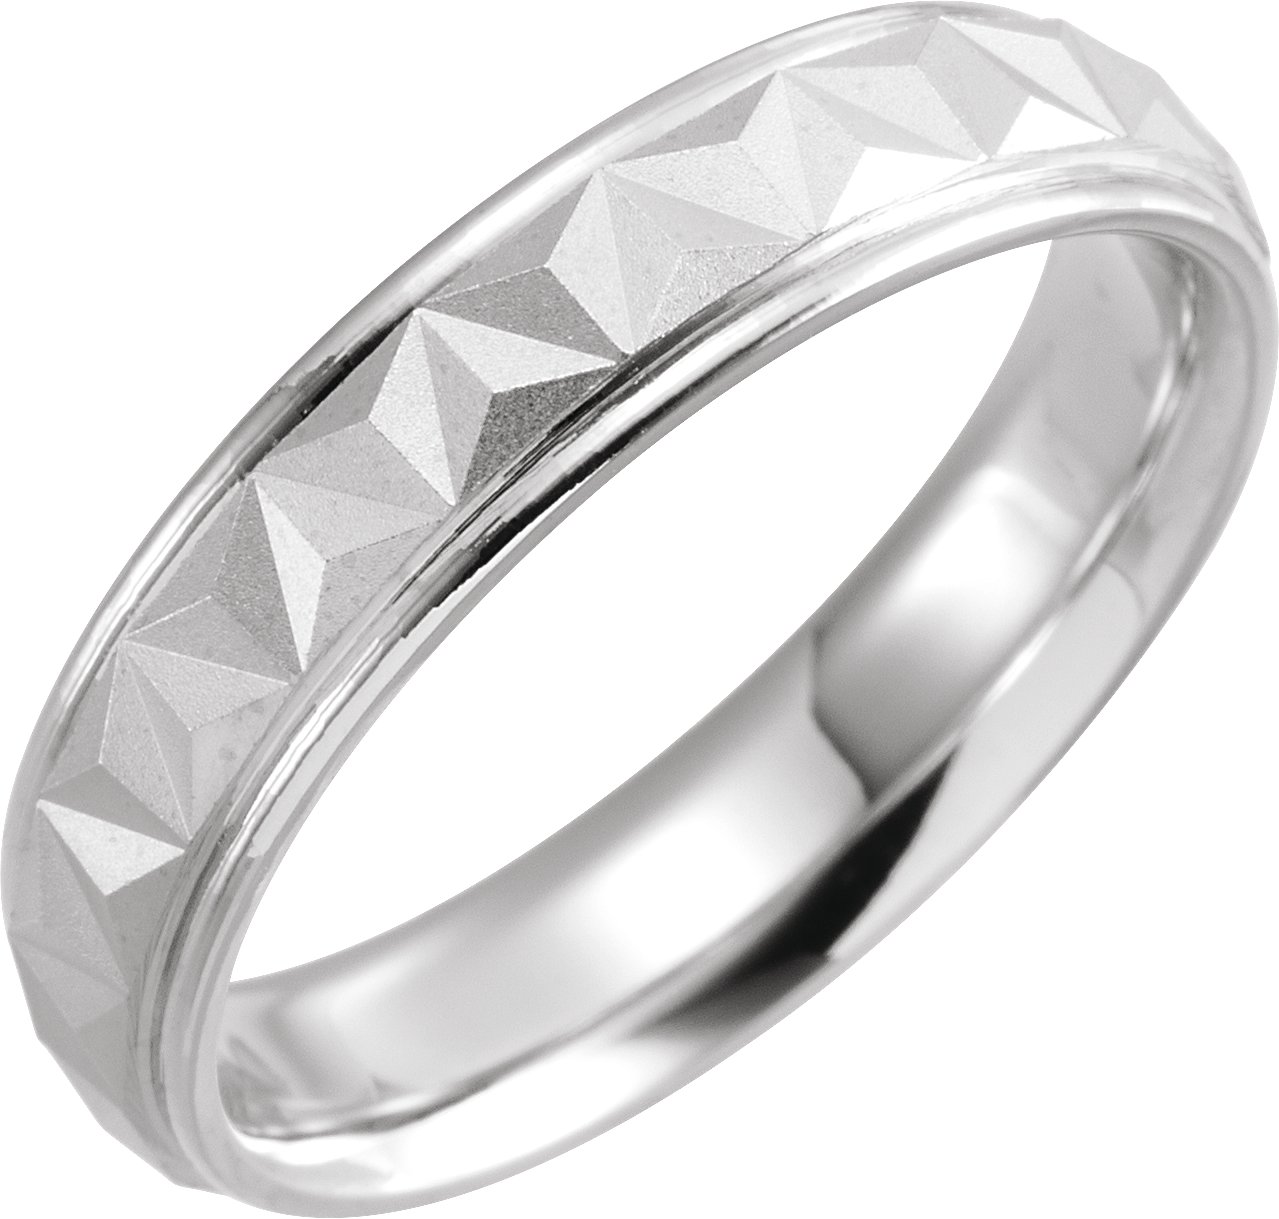 Sterling Silver 5 mm Geometric Band with Matte/Polished Finish Size 12